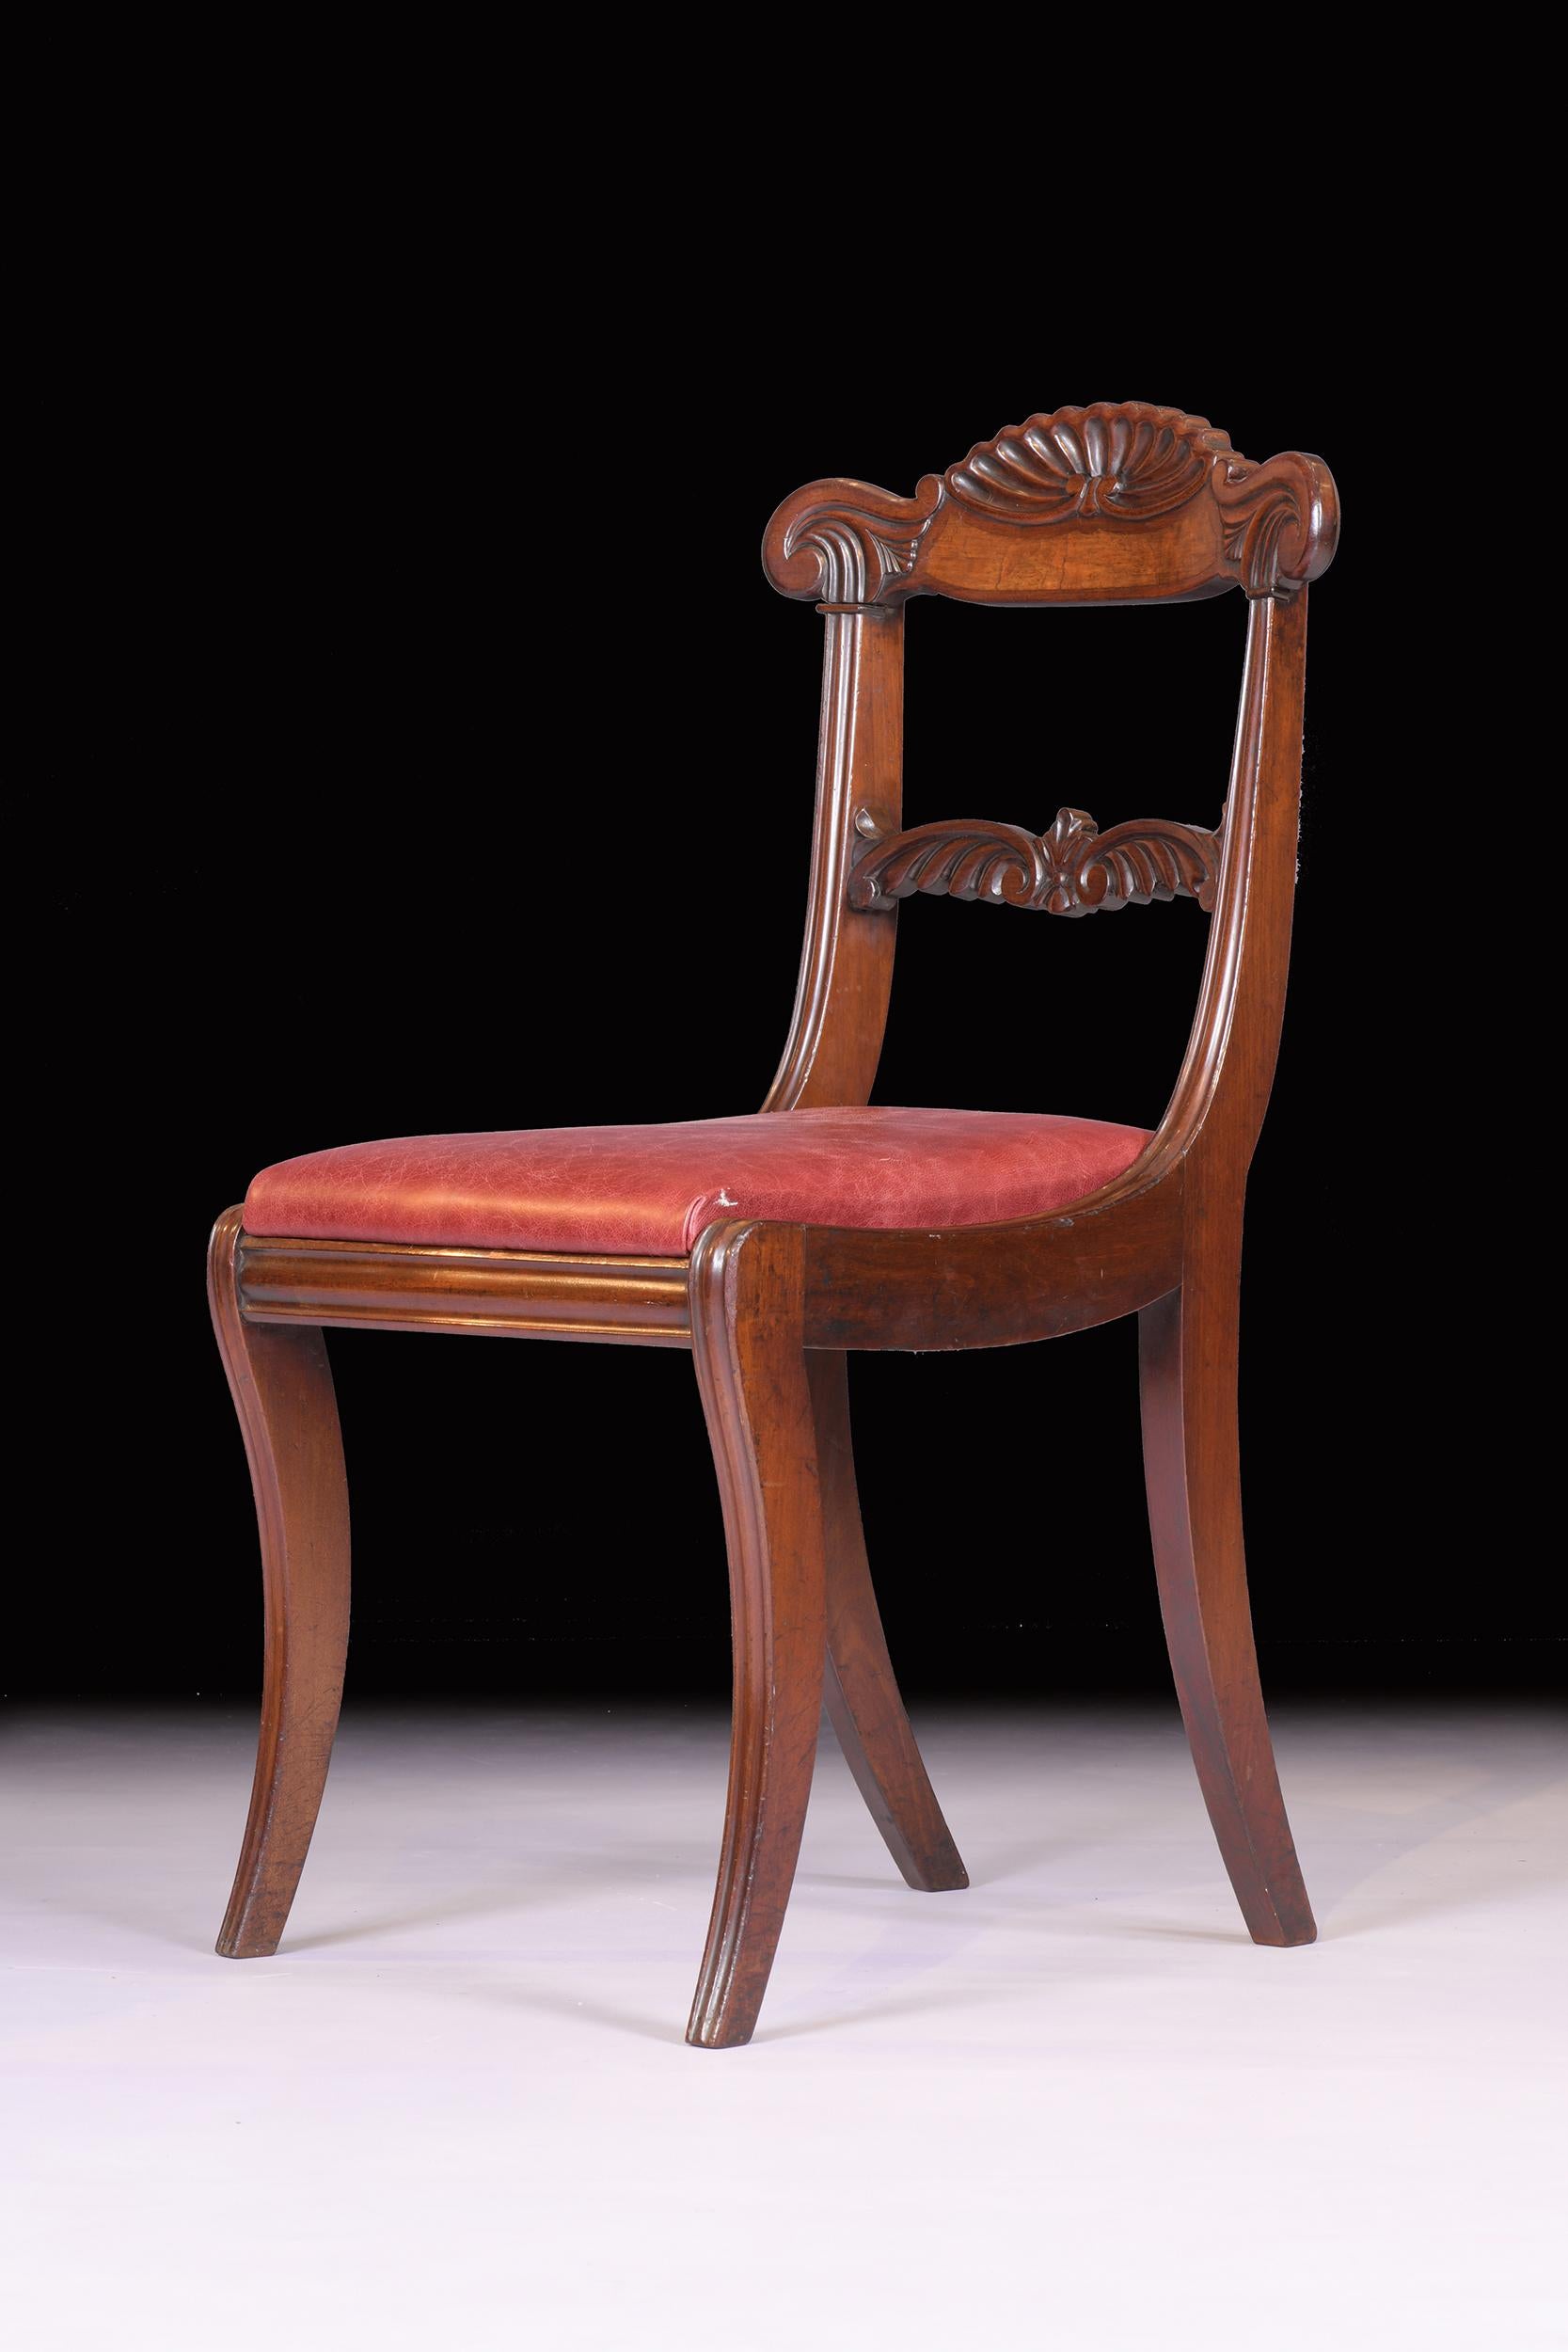 Set of 10 Early 19th Century Regency Mahogany Dining Room Chairs For Sale 3